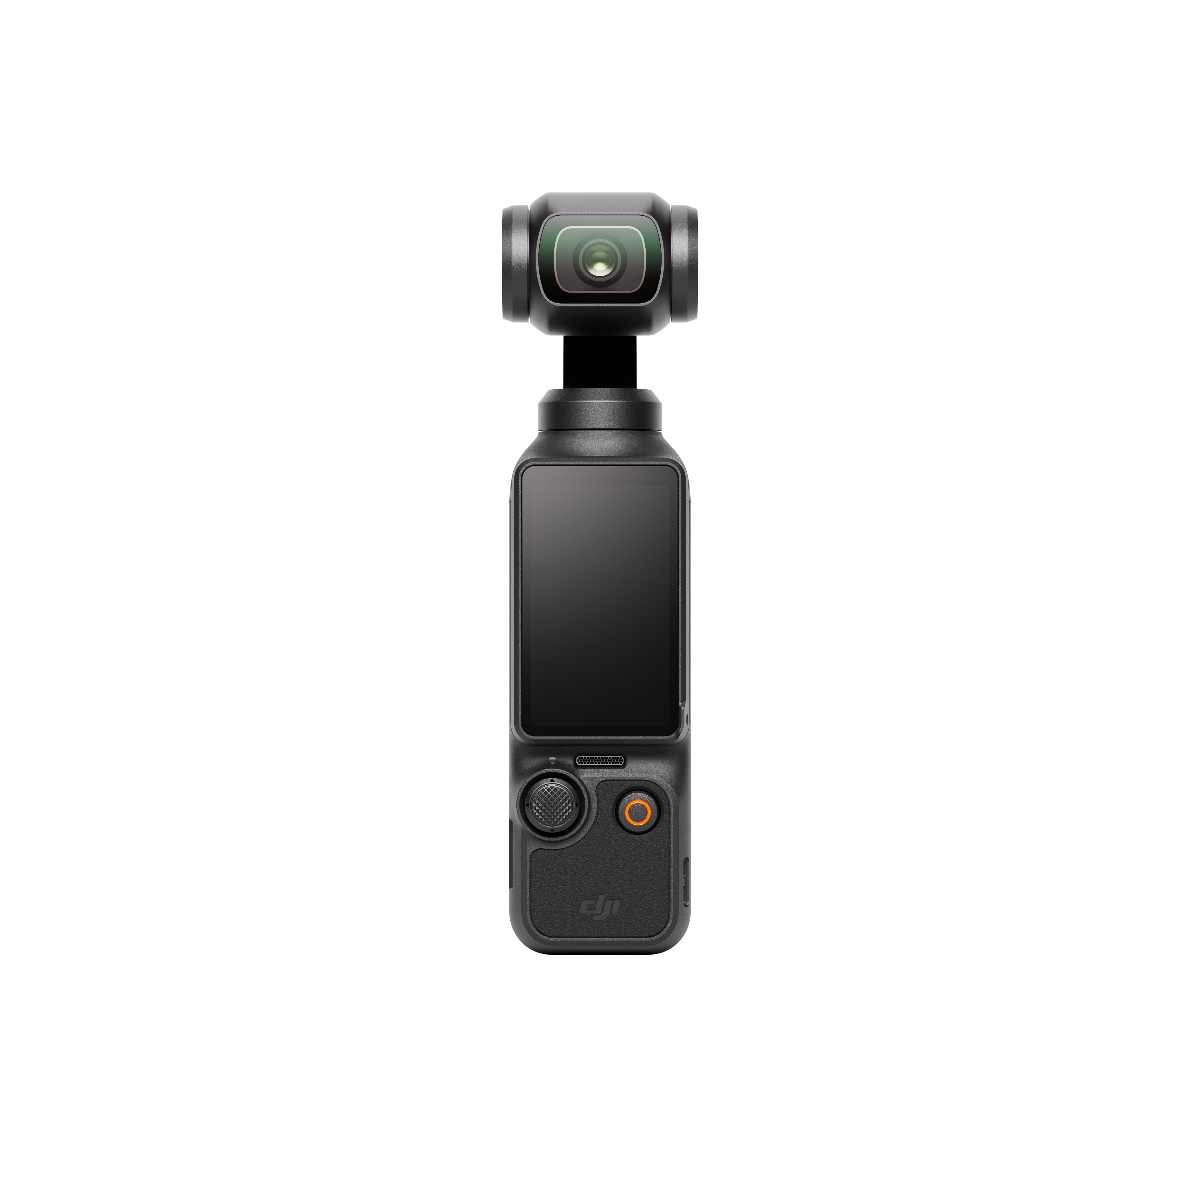 DJI Osmo Pocket - Tiny 3-Axis Stabilized Camera with 4K 60fps Recording